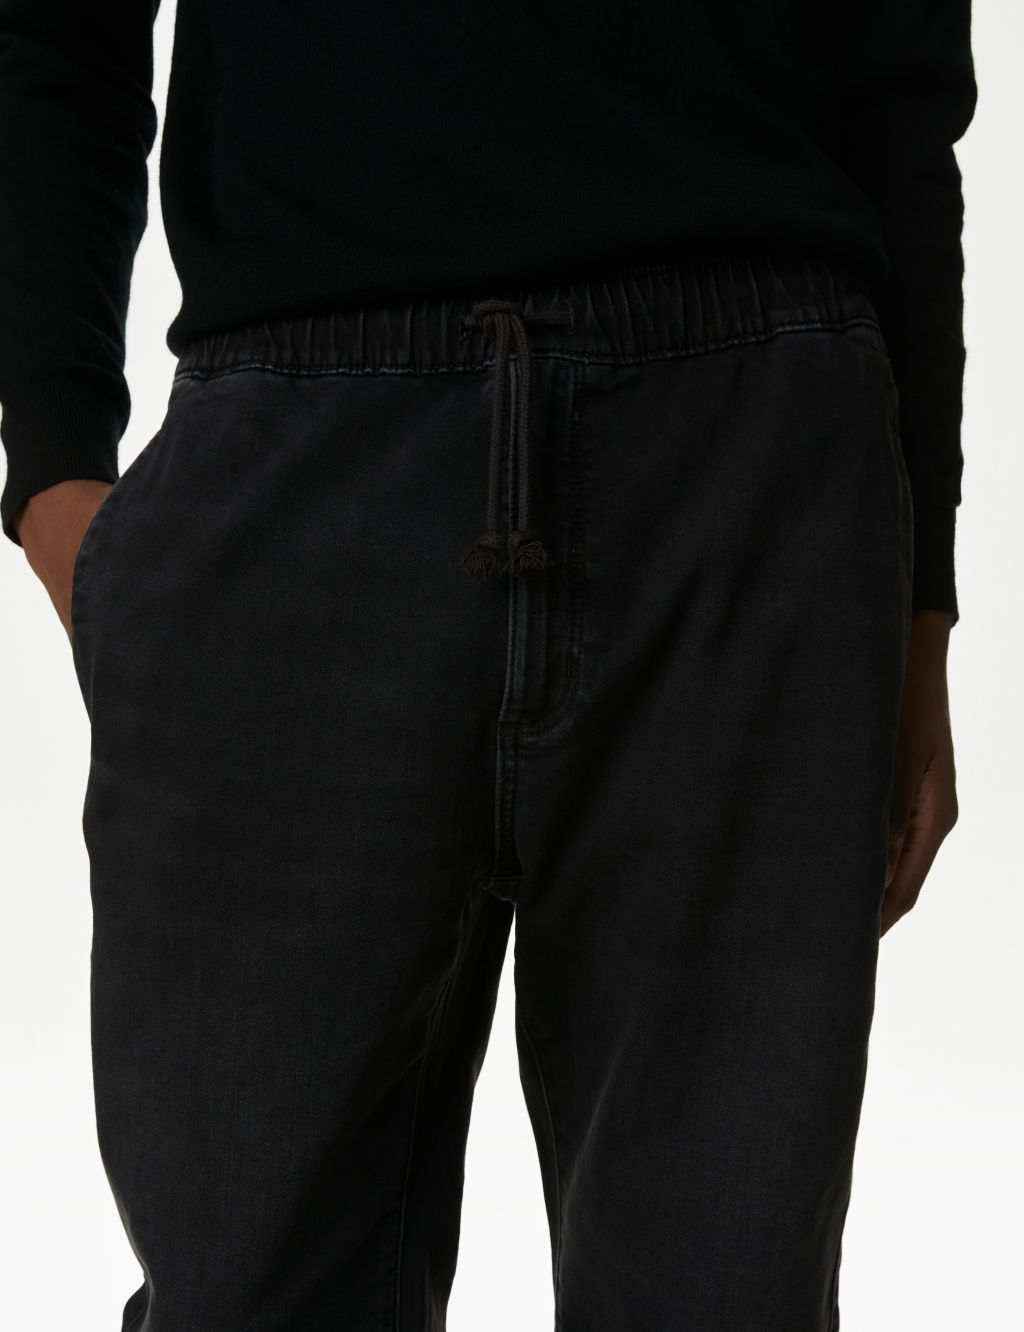 Regular Fit Jersey Cuffed Jogger Jeans image 4